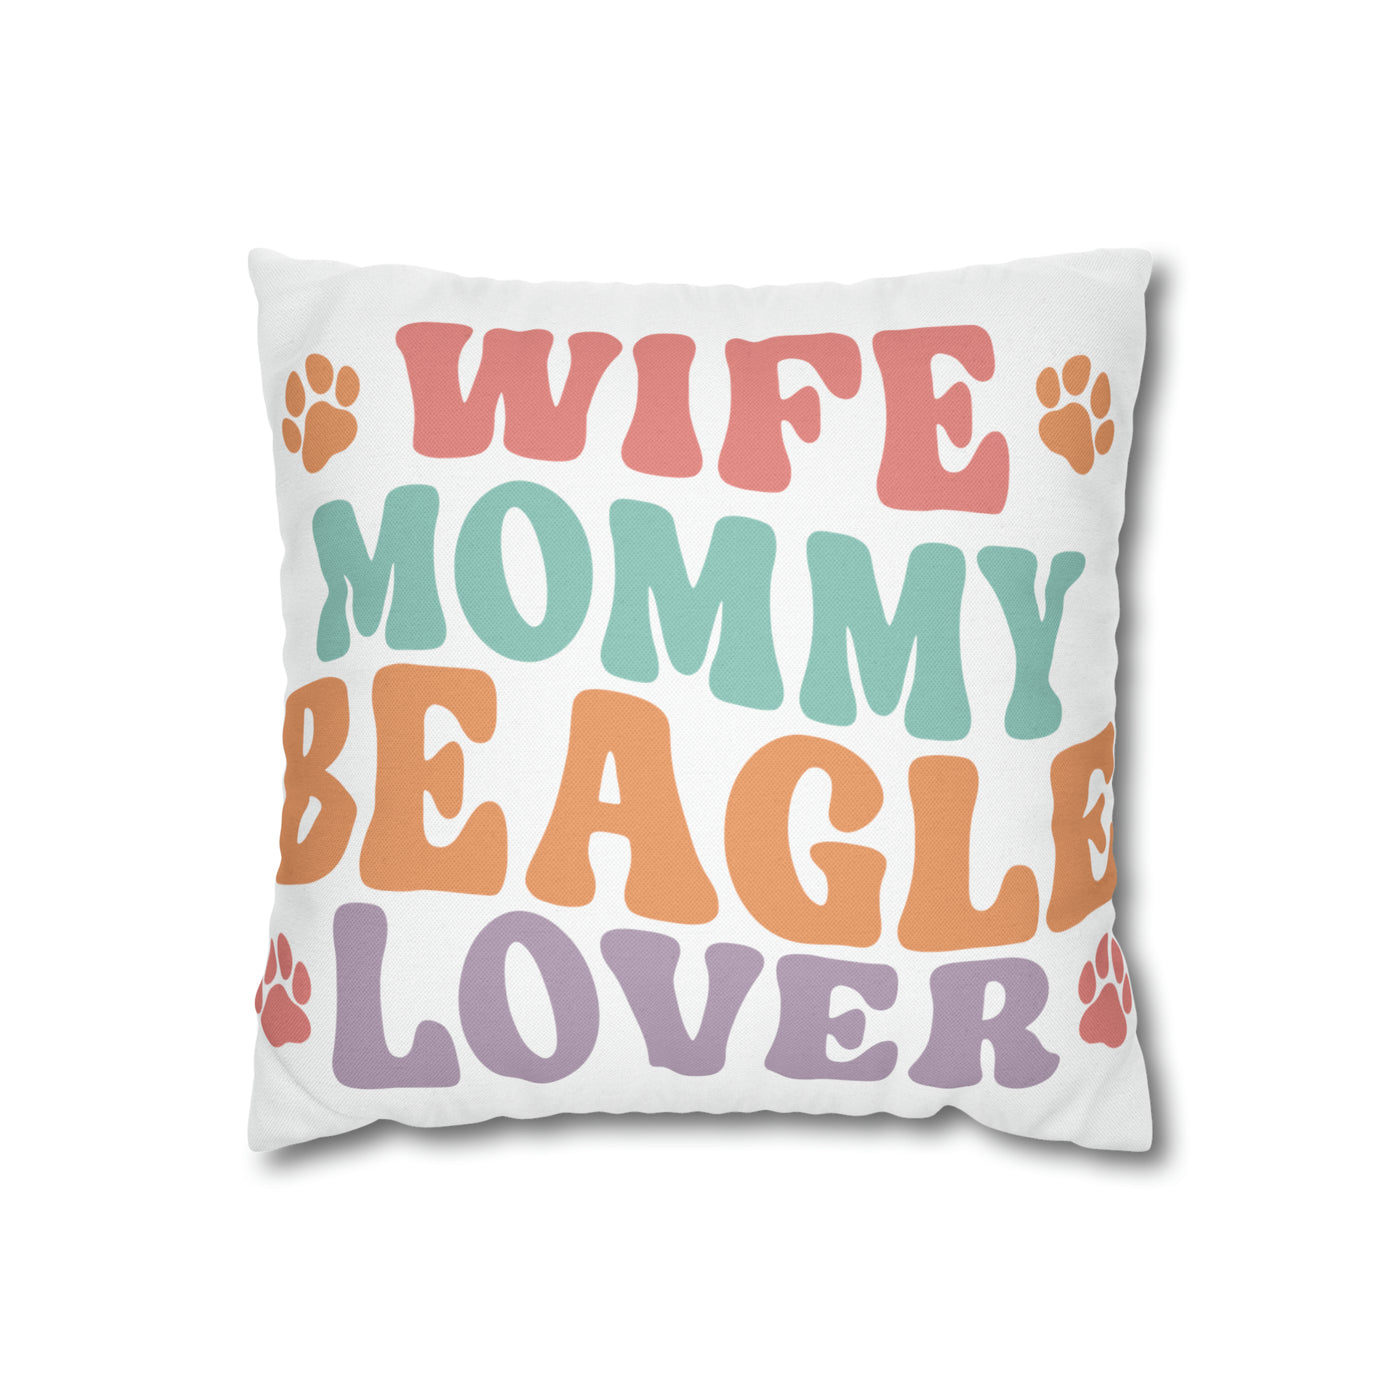 Wife Mommy Beagle Lover Square Pillow Case